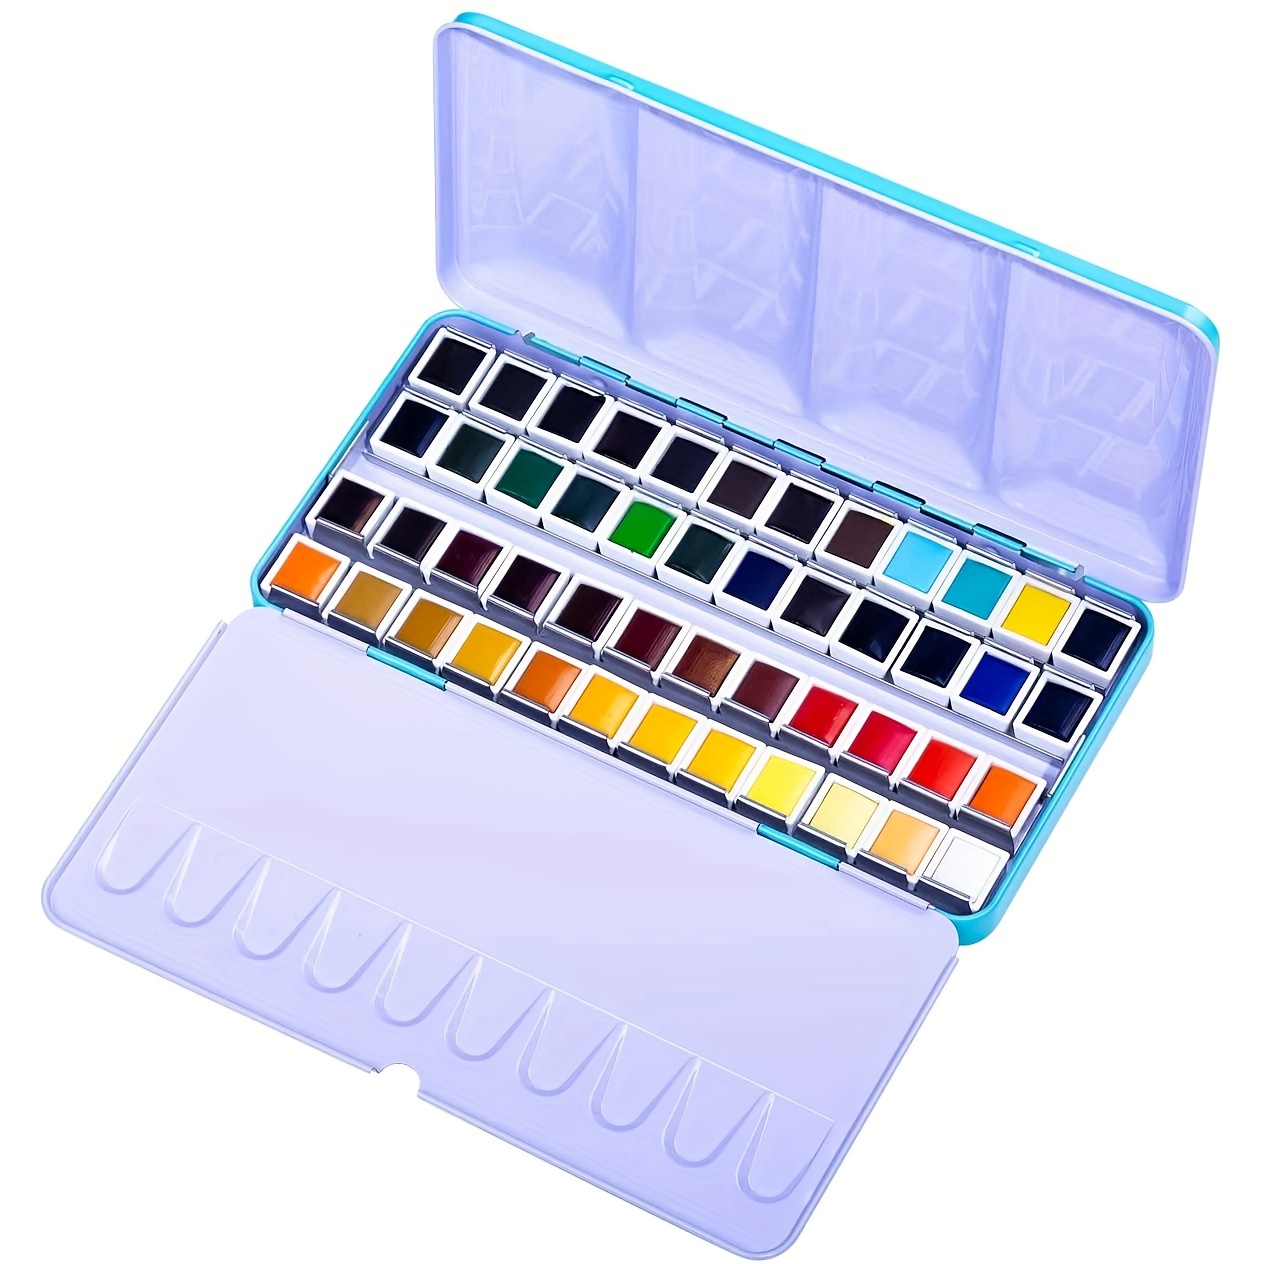 Paul Rubens Artist Grade Watercolor Paint Set, 24 Colors with Portable  Glitter Box for Artists, Beginners, Hobbyists, Art Paints Glittery White